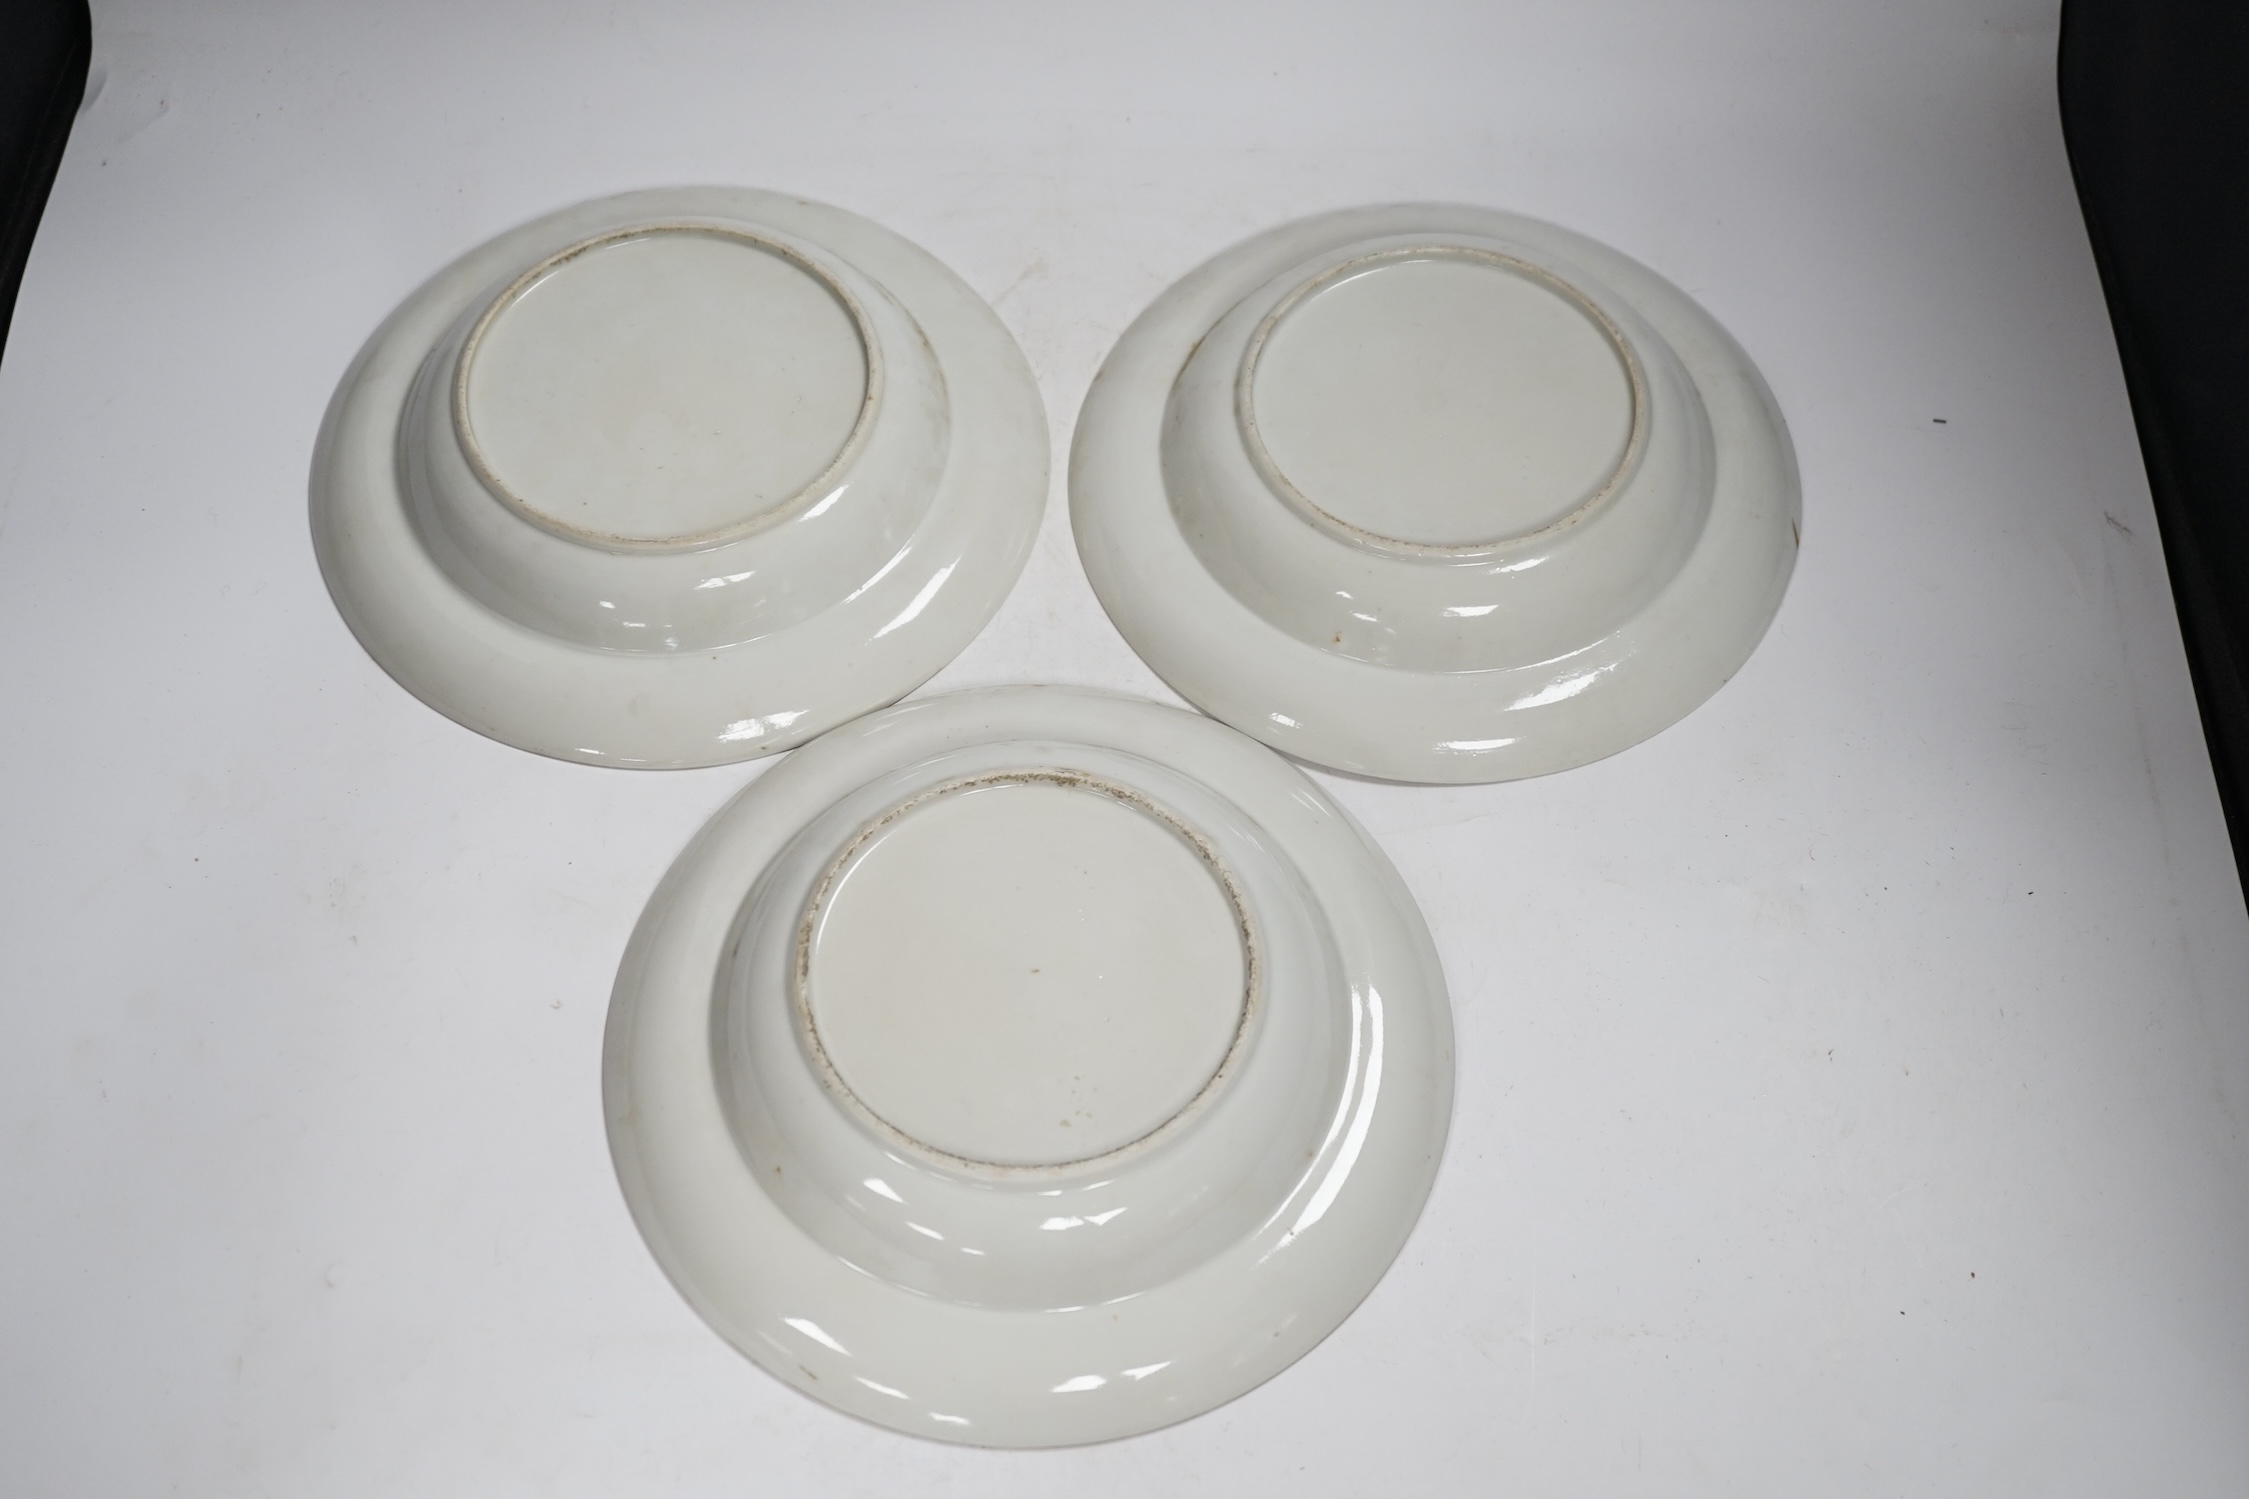 Three early 19th century Chinese famille rose soup plates, 25.5m diameter